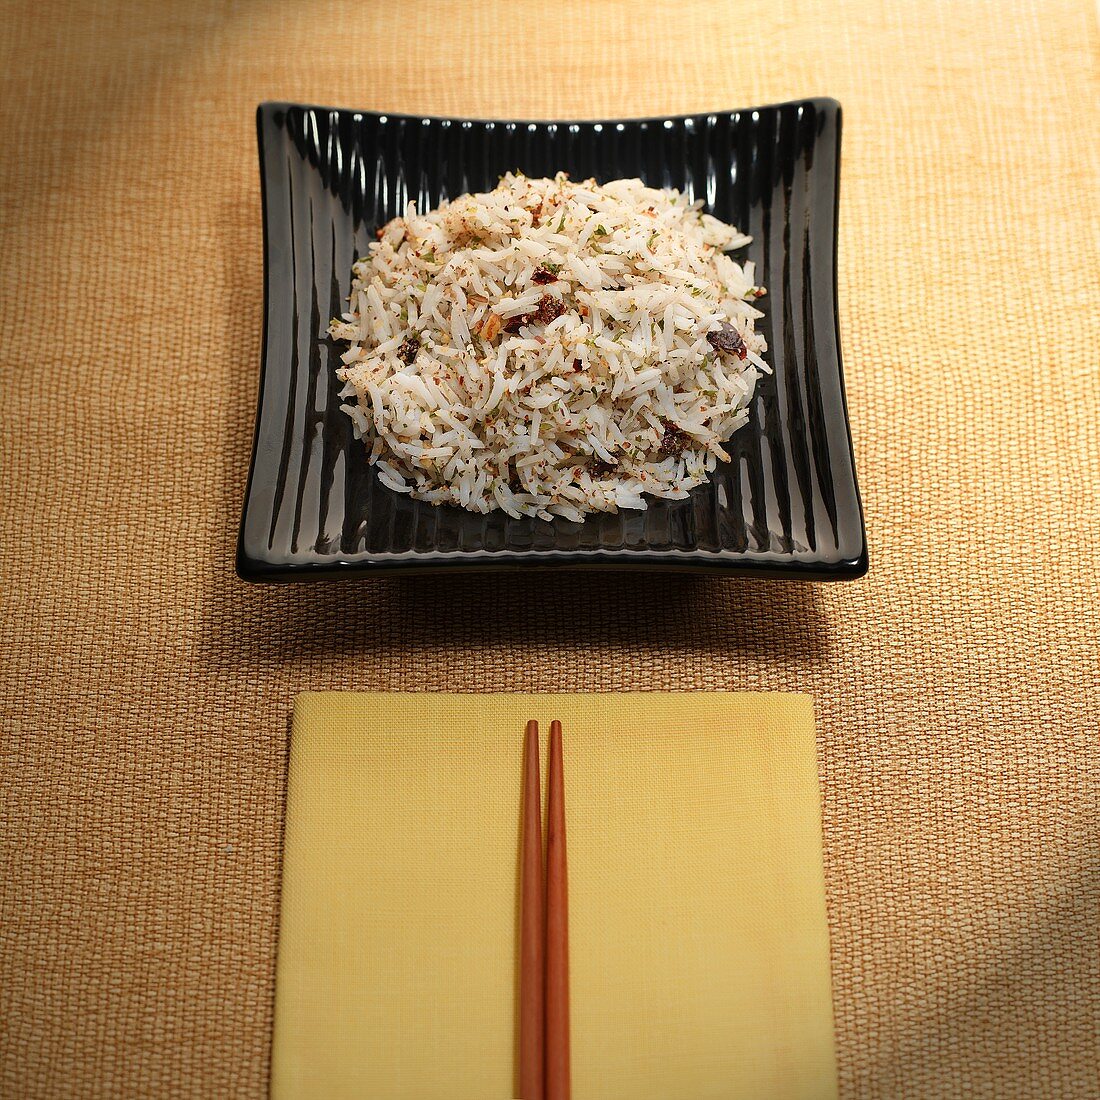 Asian Rice with Sun Dried Tomatoes on a Square Plate